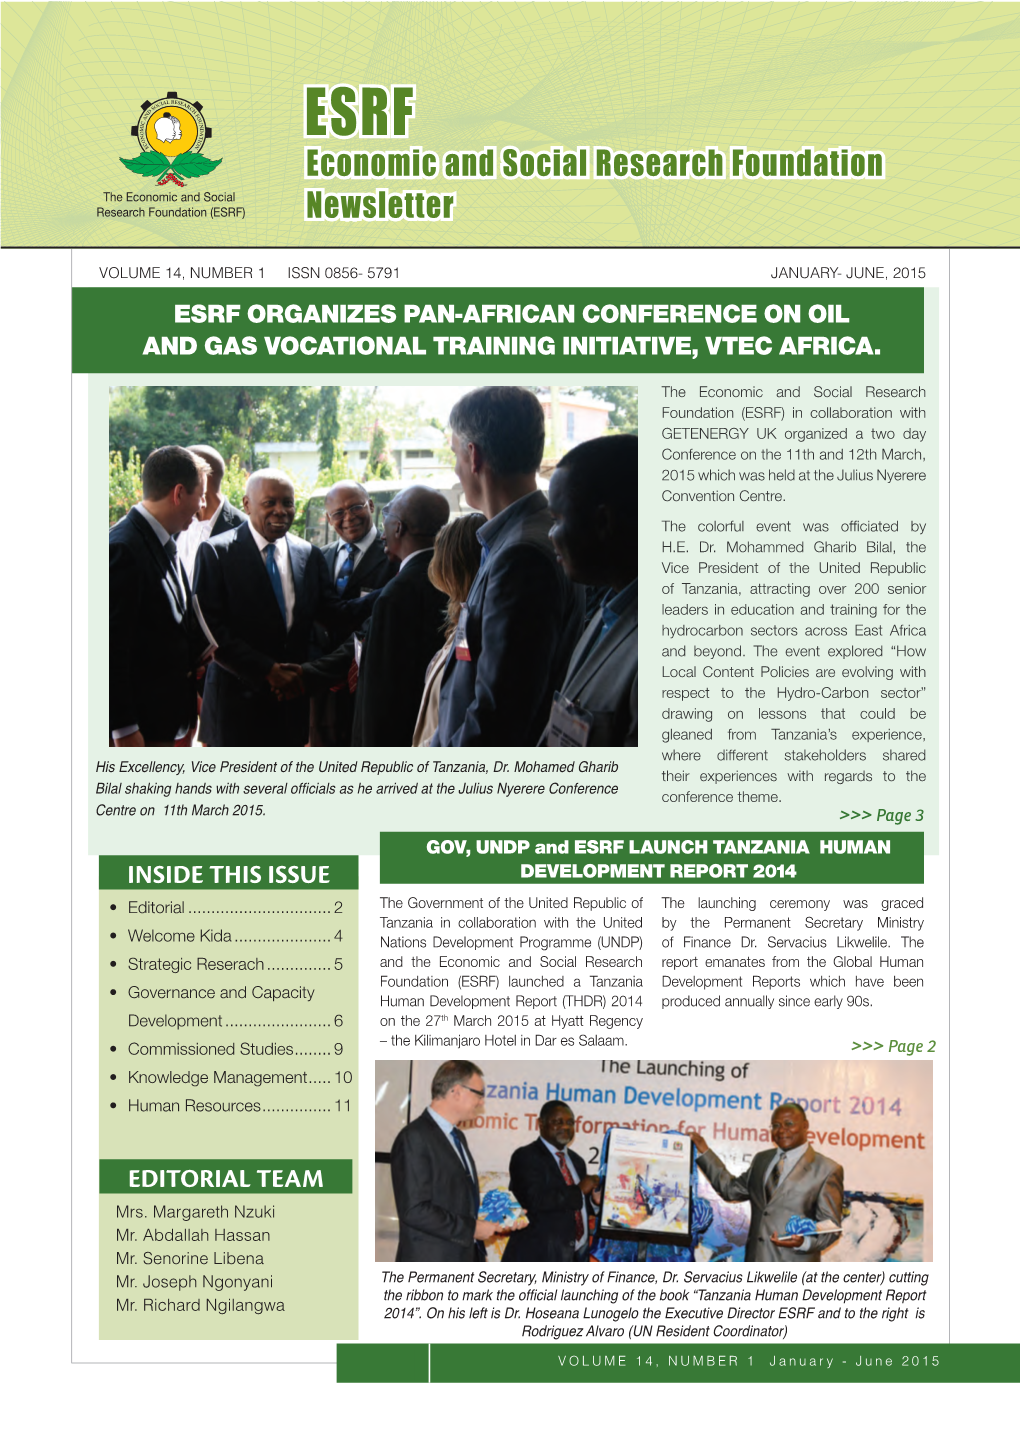 Esrf Organizes Pan-African Conference on Oil and Gas Vocational Training Initiative, Vtec Africa